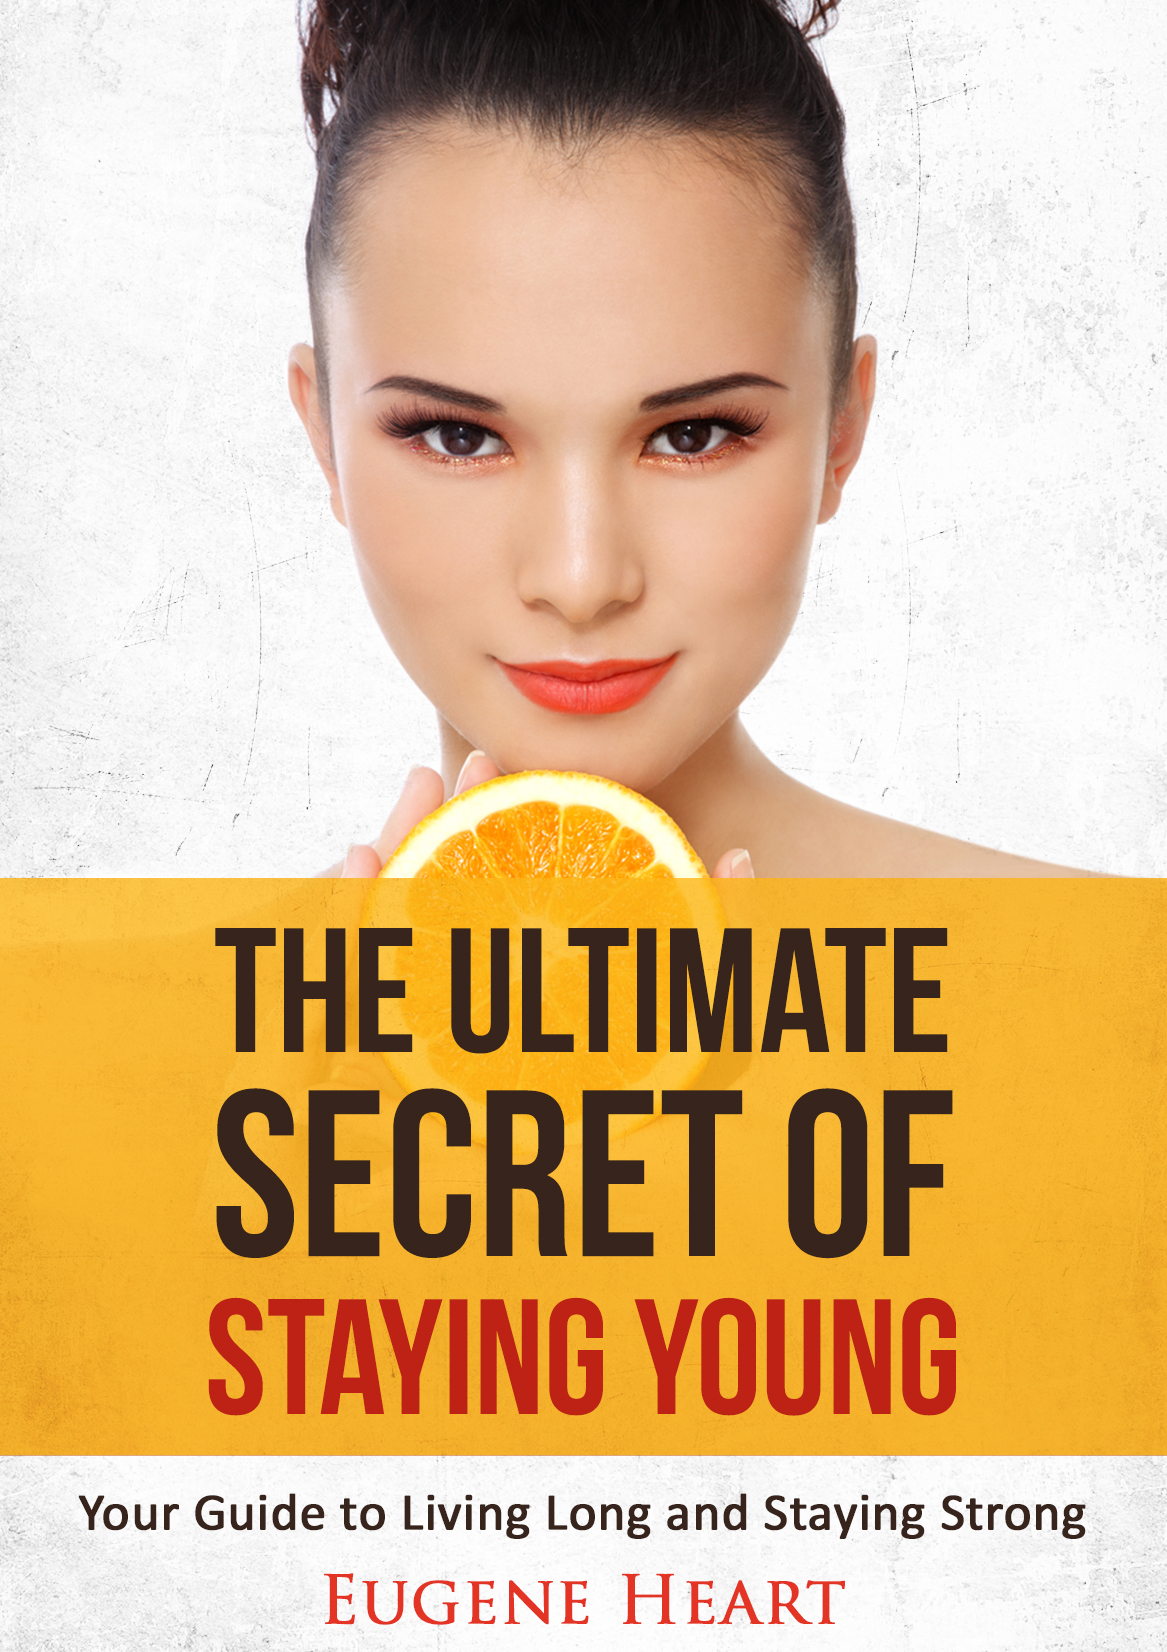 FREE: The Ultimate Secret of Staying Young: Your Guide to Living Long and Staying Strong by Eugene Heart